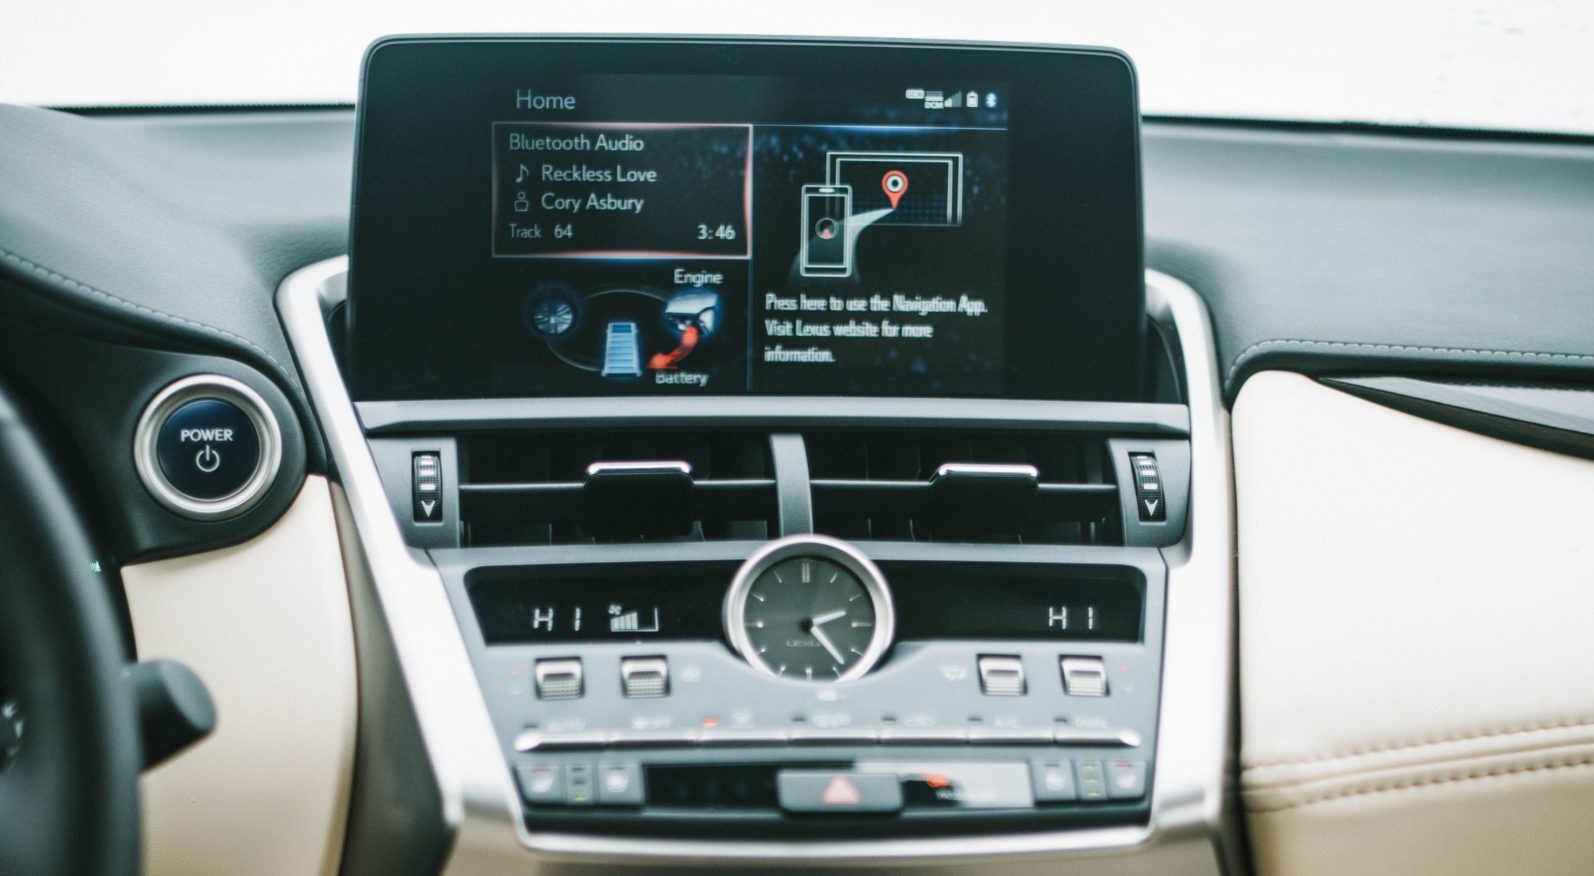 Infotainment Systems Remain Key Point Of Focus For Automakers